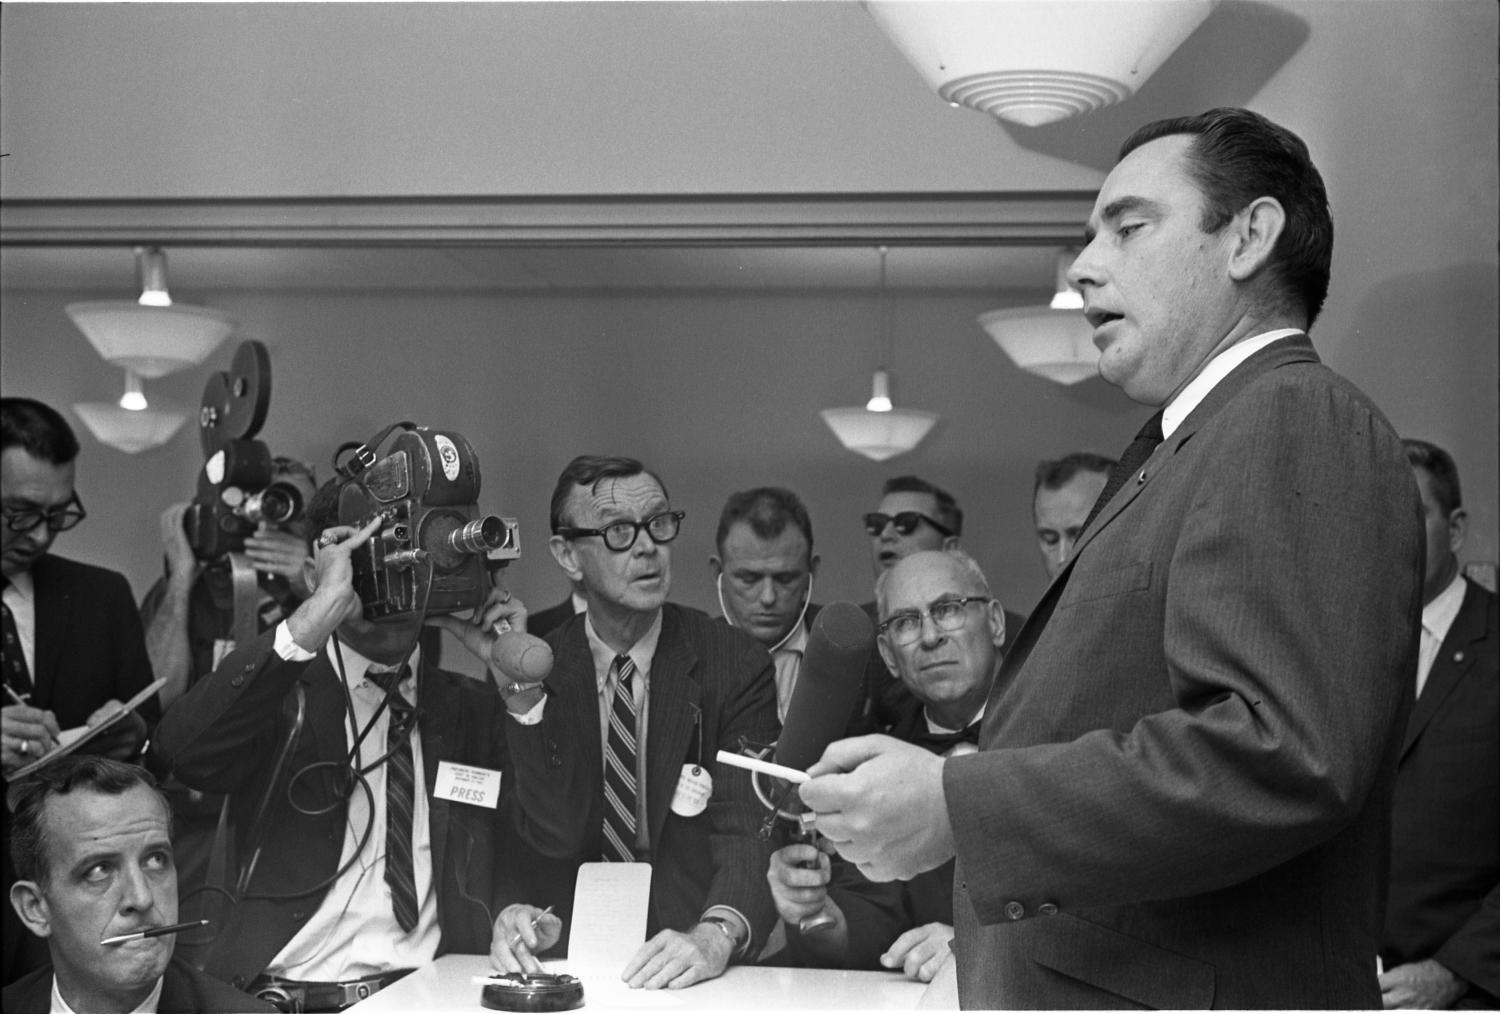 Malcolm Kilduff making the official announcement at 1:30 p.m. on Friday, November 22, 1963, to reporters that President Kennedy had died.